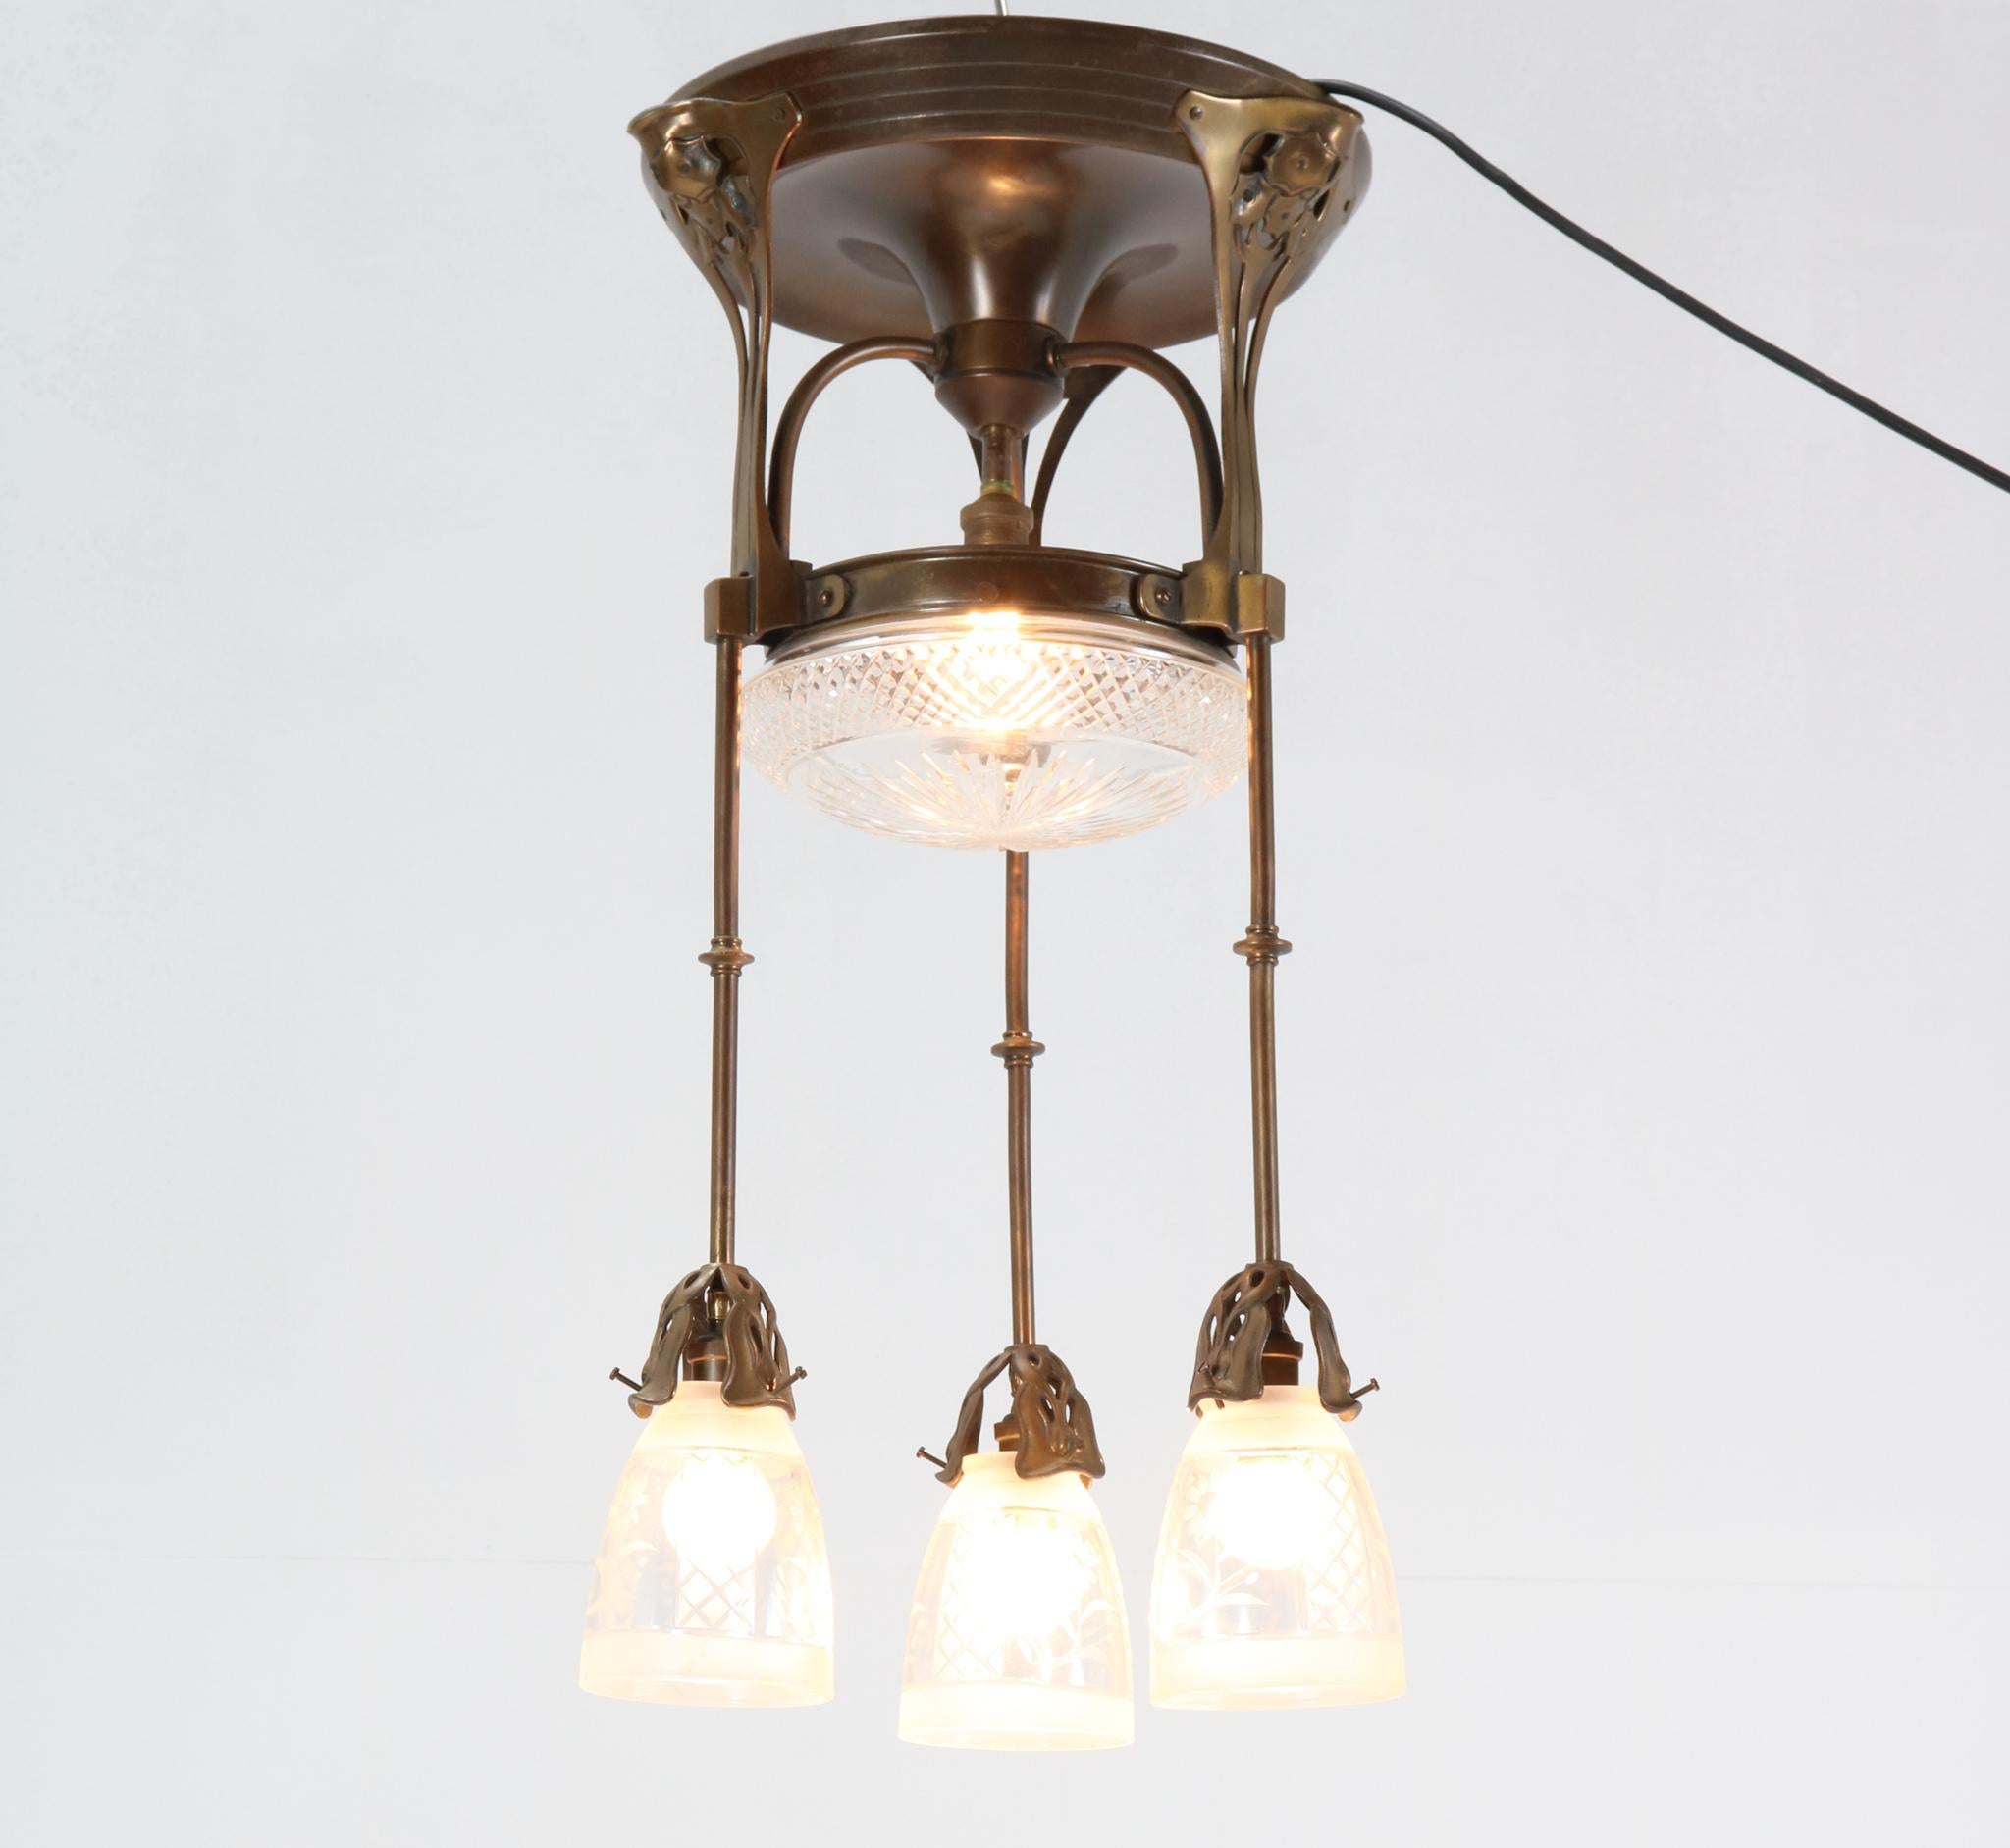 Stunning and rare Jugendstil Art Nouveau chandelier.
Striking German design from the 1900s.
Patinated brass frame with four original hand-blown etched glass shades.
Rewired with four sockets for four B-15 light bulbs.
This wonderful Jugenstil